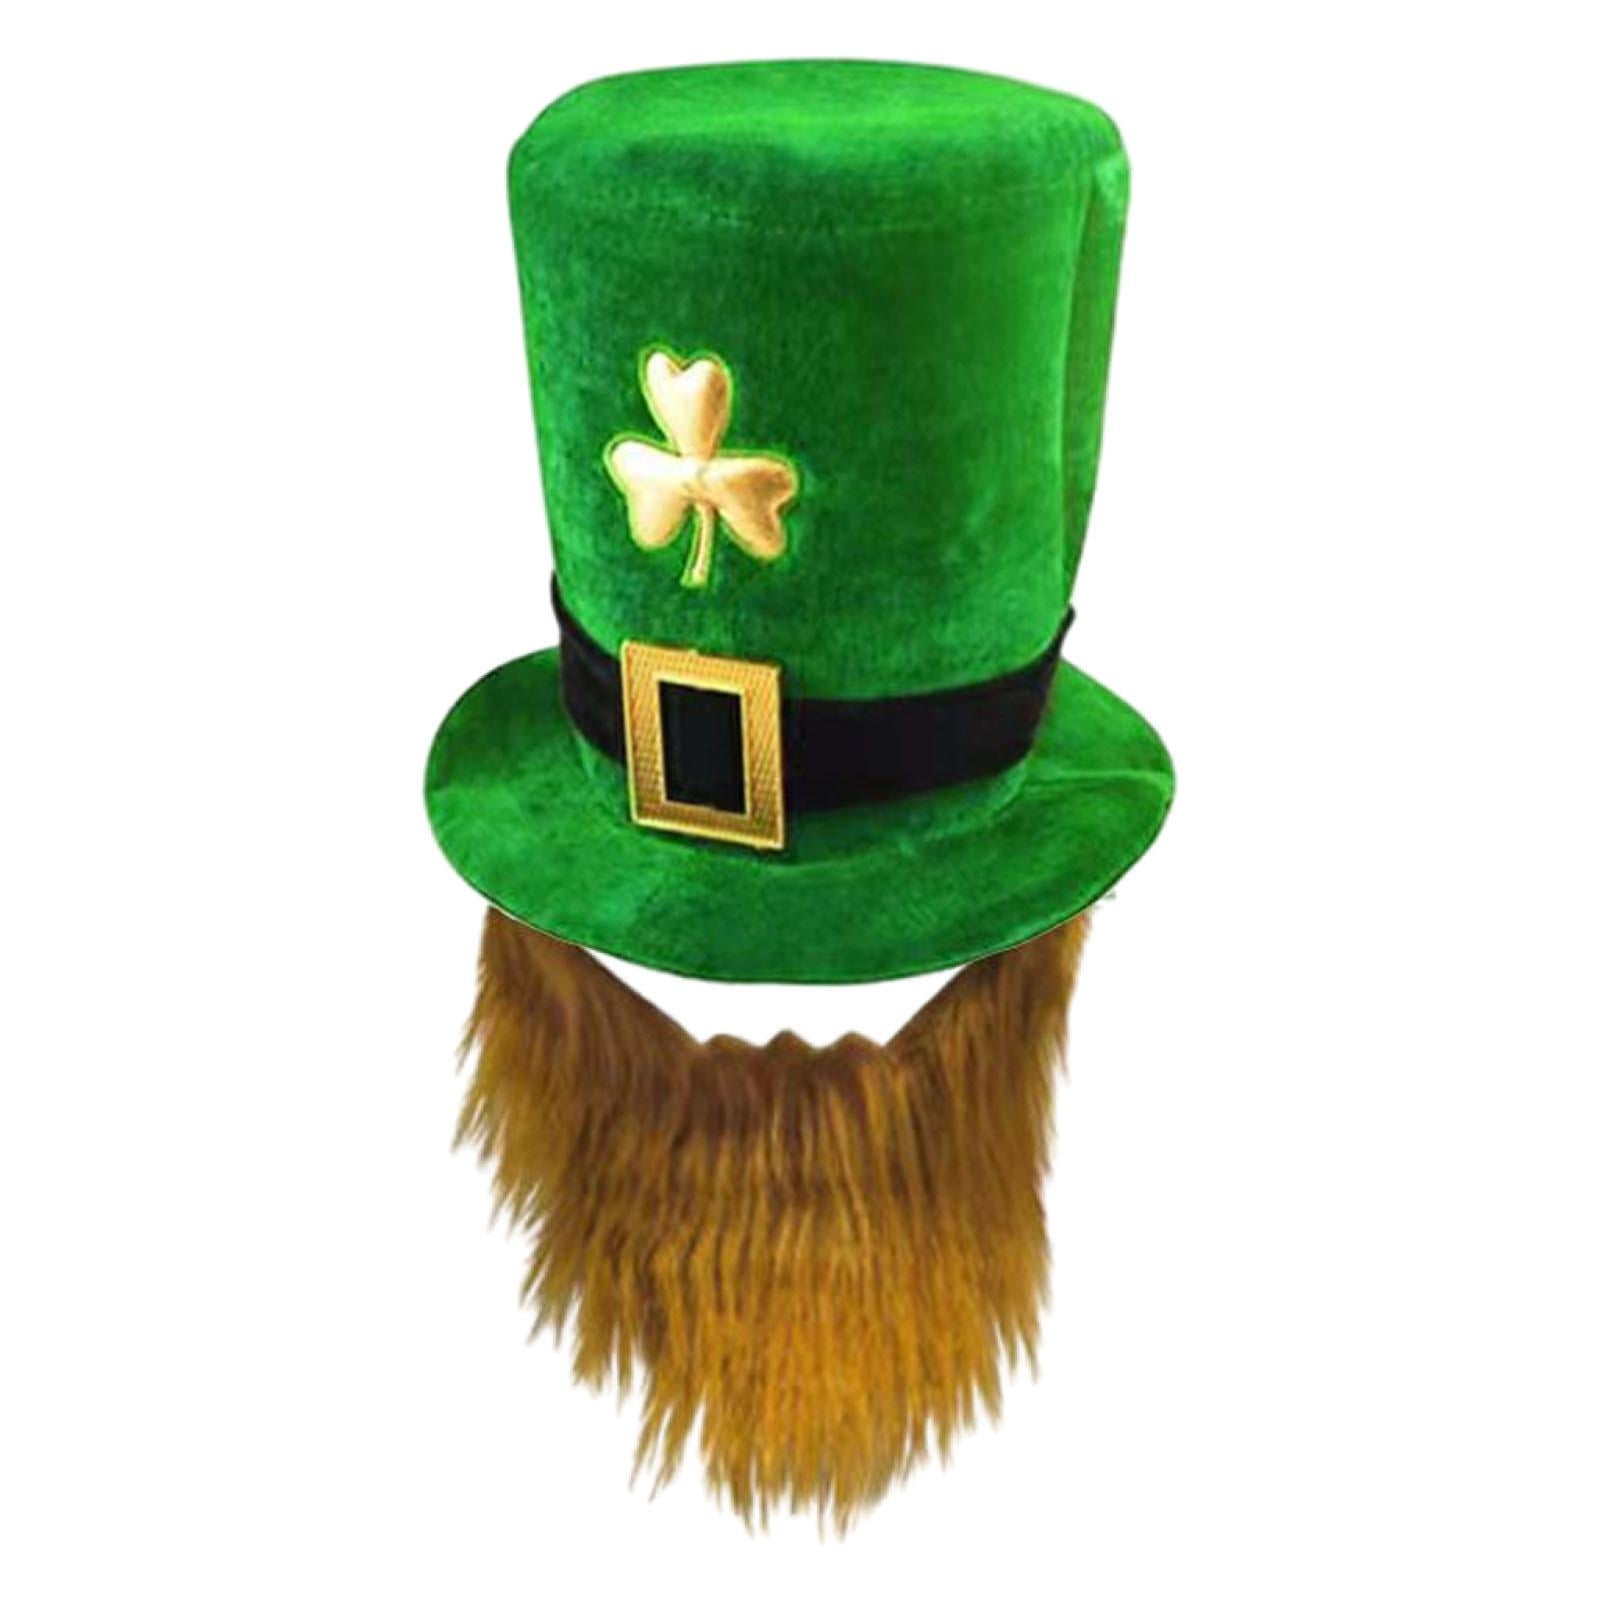 Outfit Accessories Party Supply St Party Favor Patrick's Day Irish Top Hat and Beard Leprechaun Green Dress-up Costume 